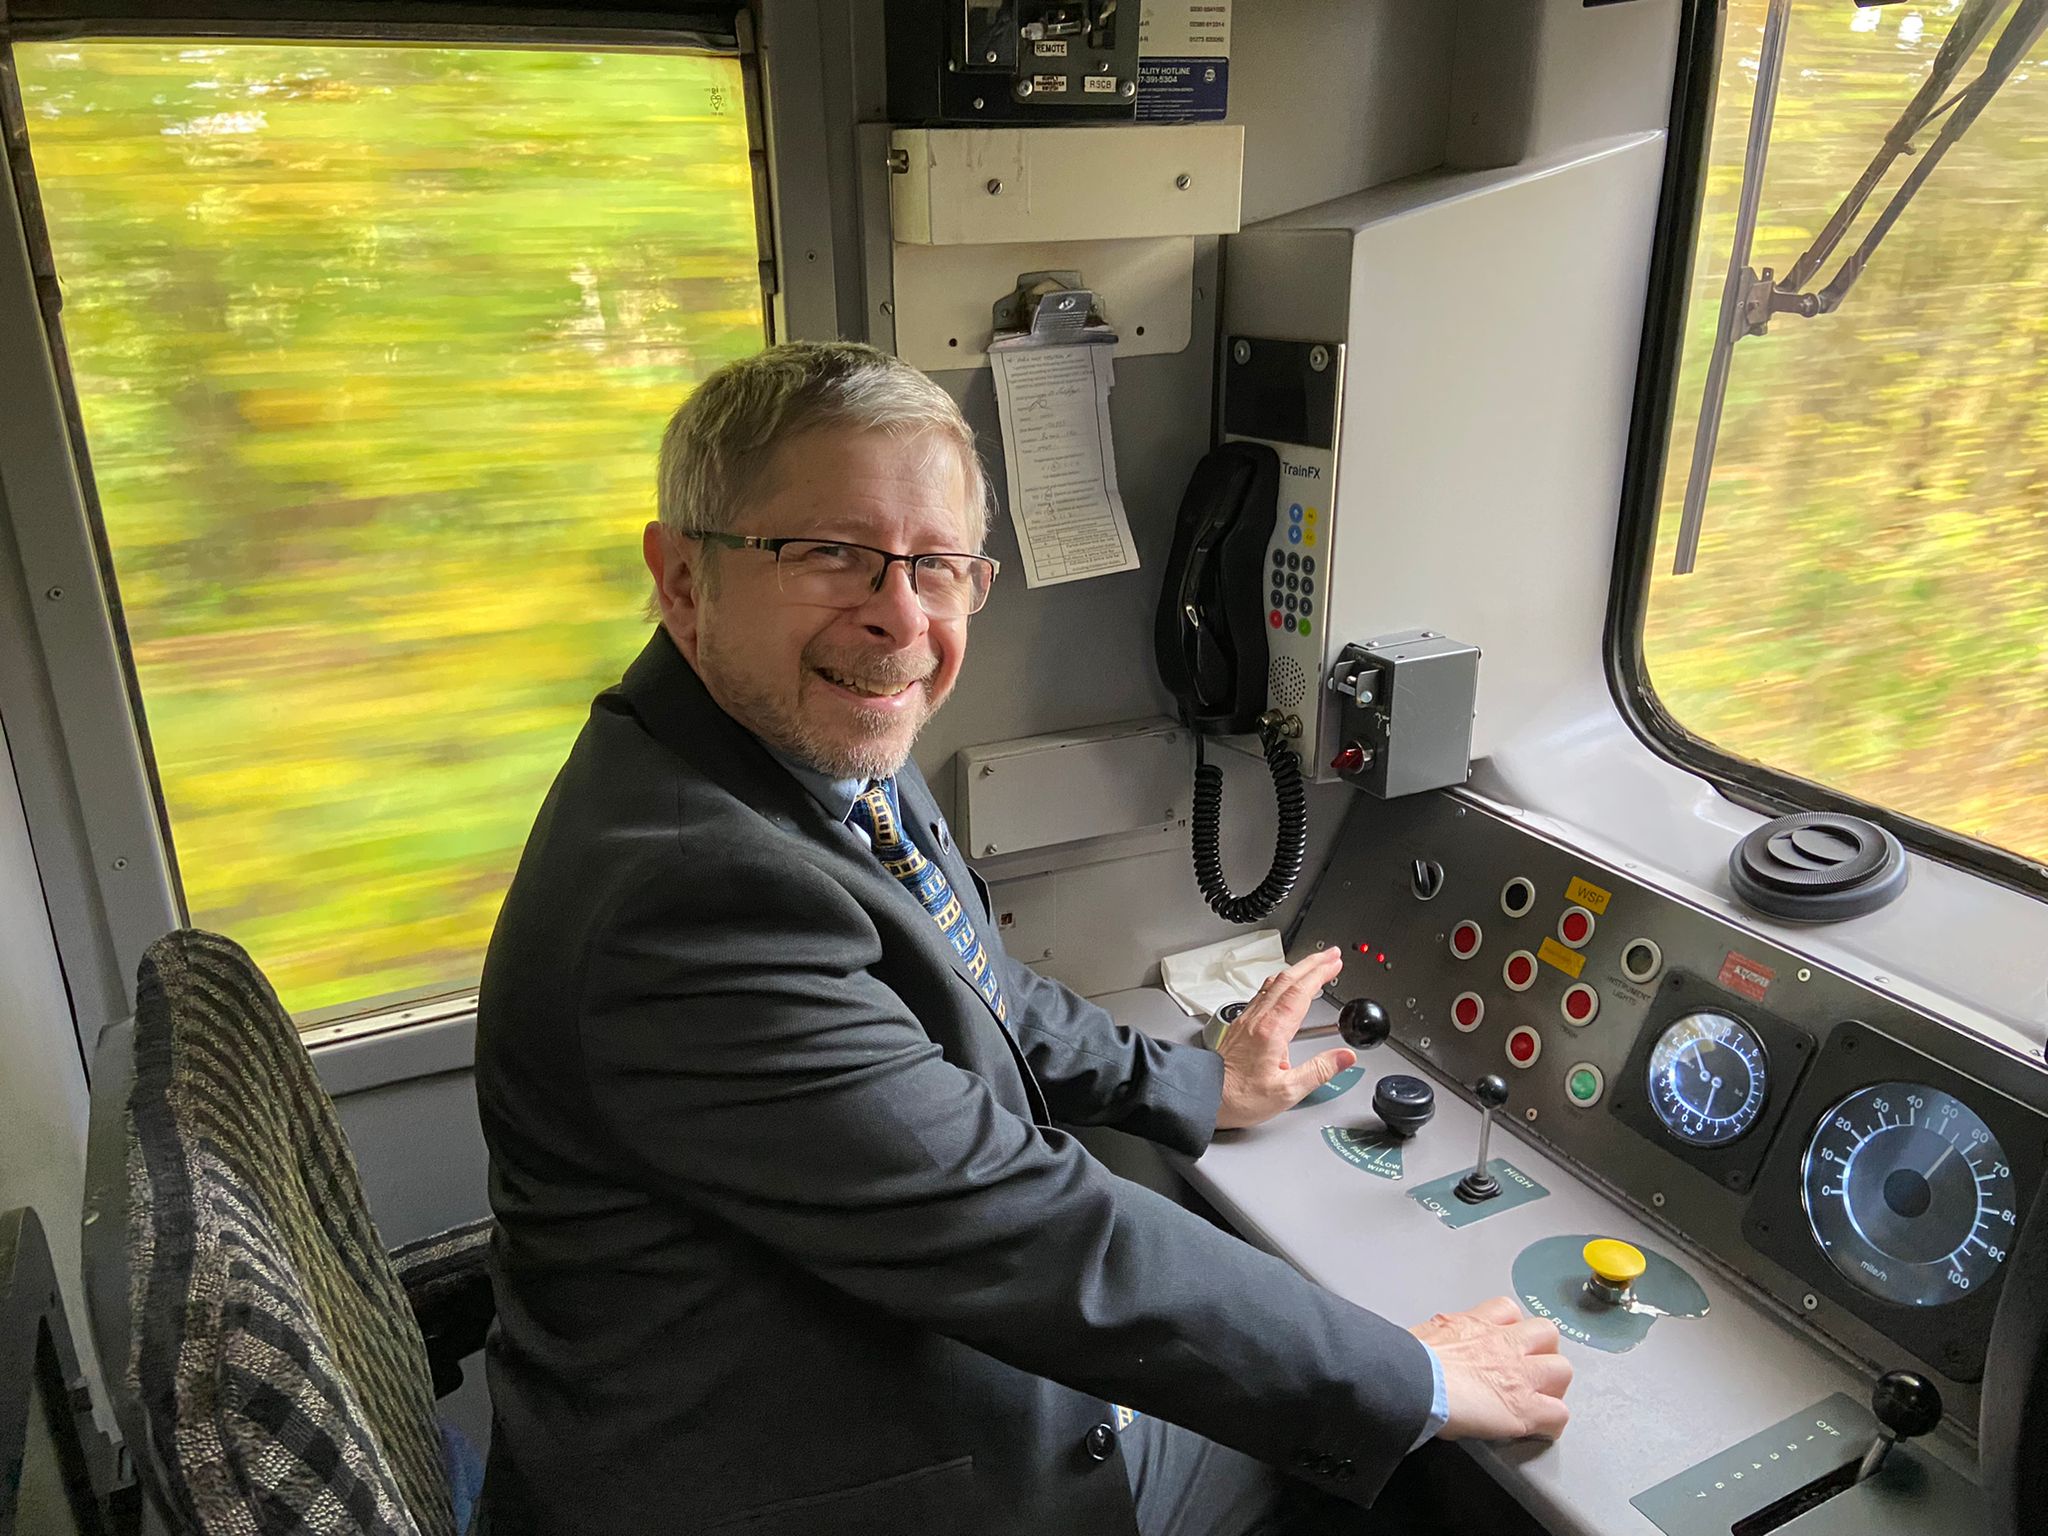 A train driver smiling as the greenery of West Devon rushes by